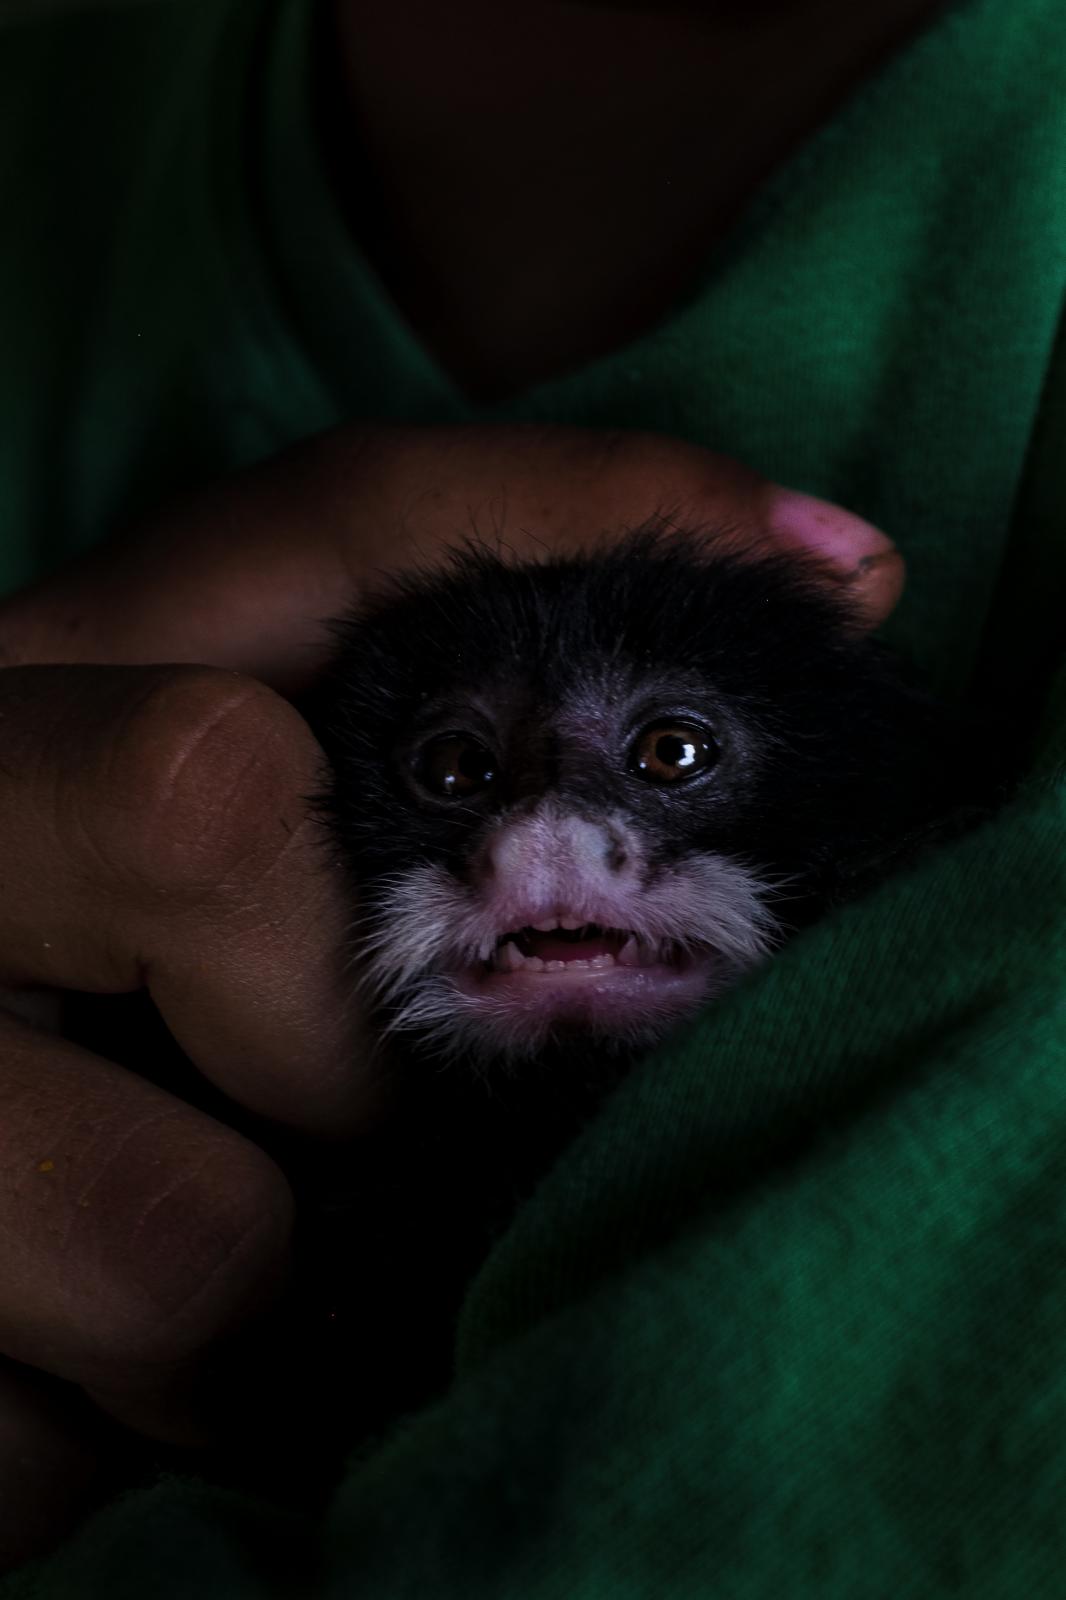 A boy carries a baby monkey that was taken from its mother somewhere in the Brazilian jungle, in...